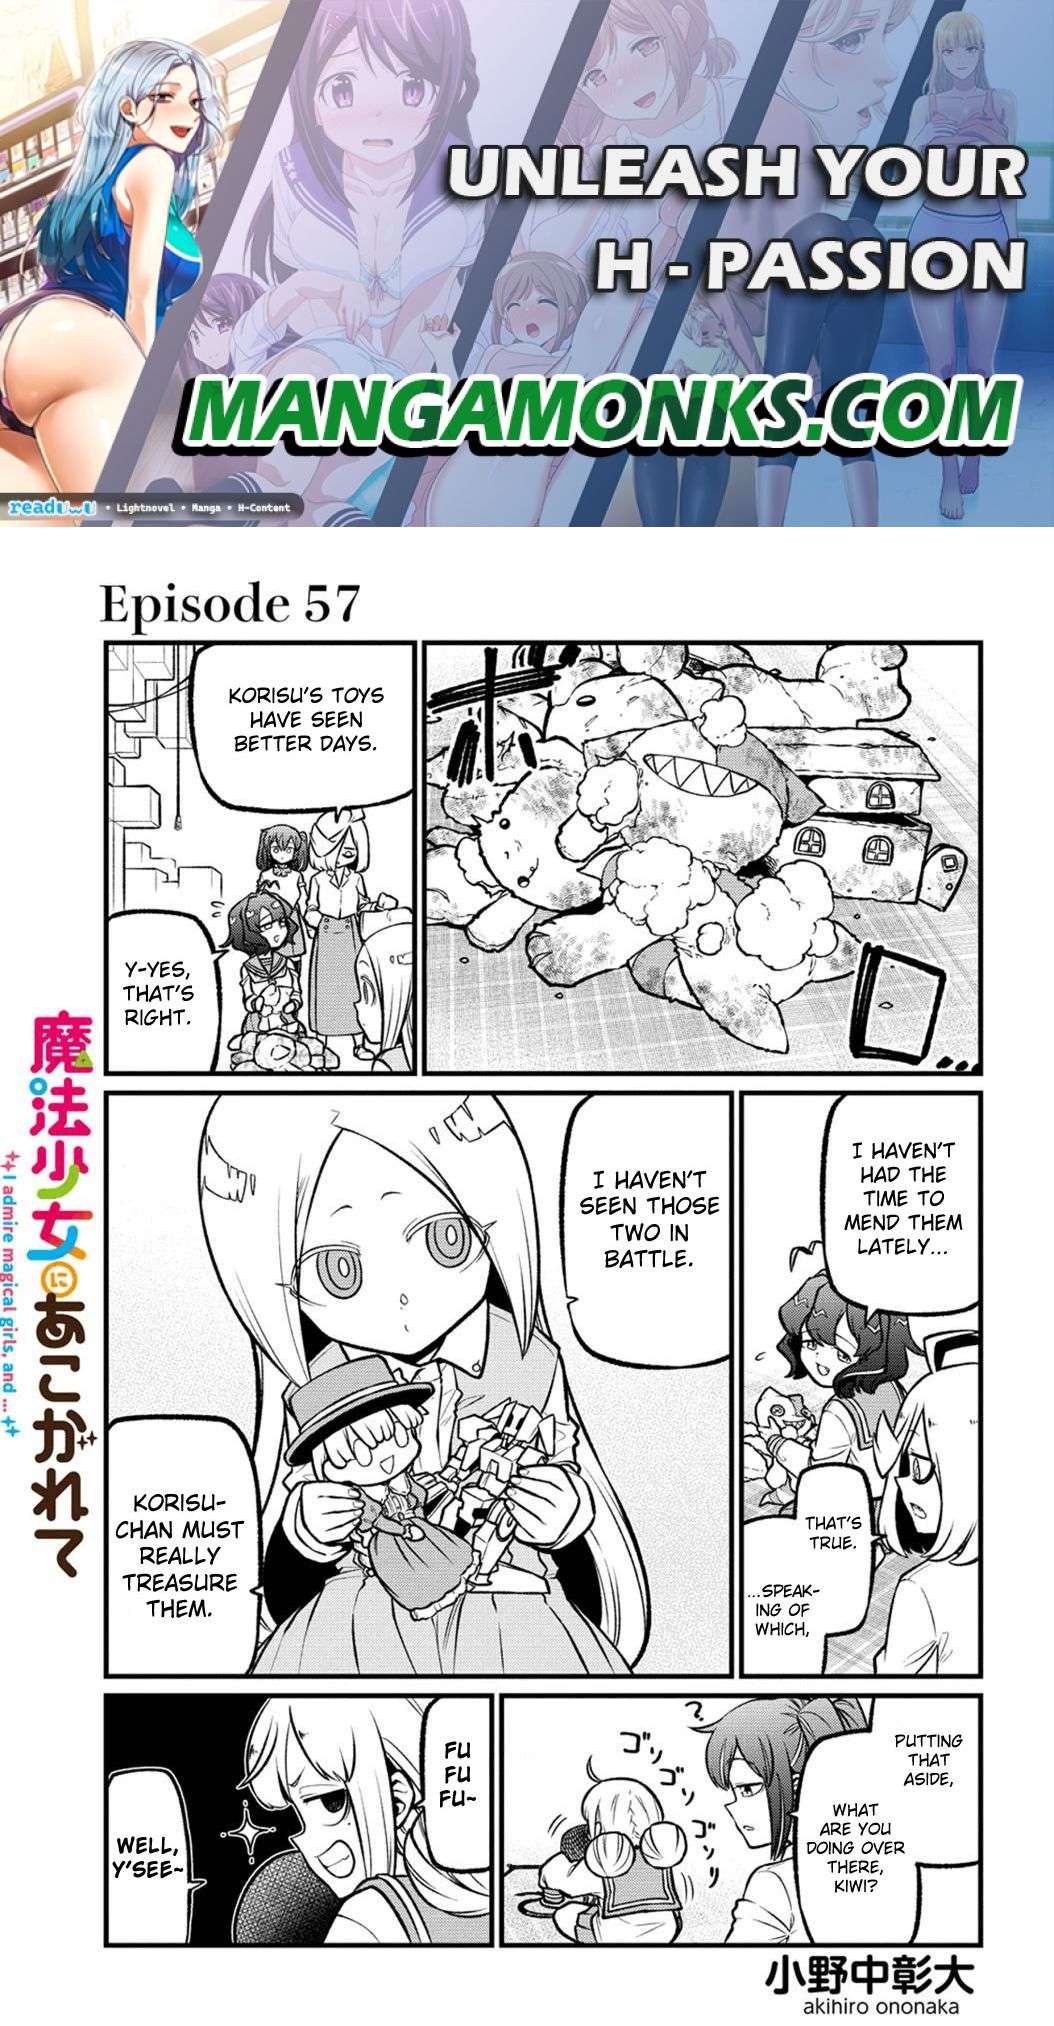 Gushing over Magical Girls - chapter 57 - #1